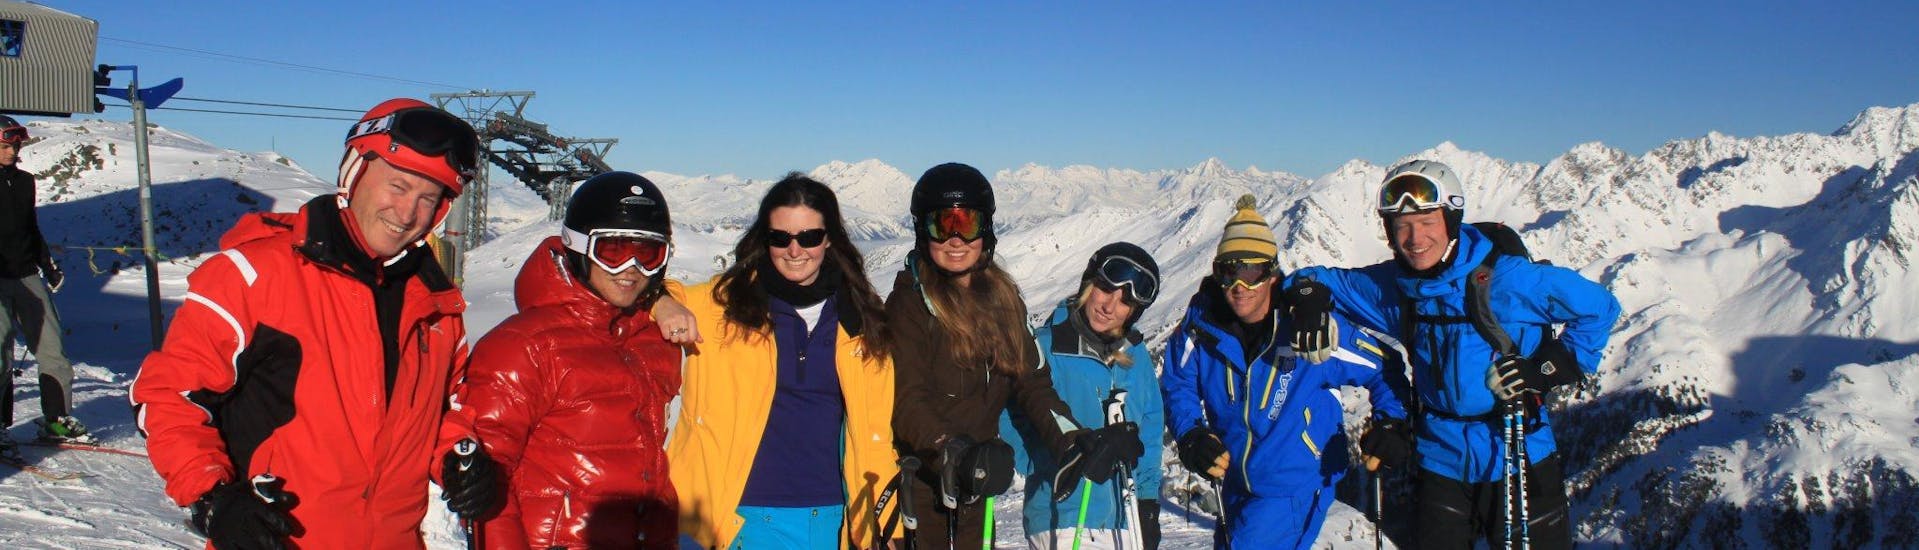 The group of skiers are taking a break during the Adults Ski Lessons with Altitude Ski School Verbier & Gstaad.